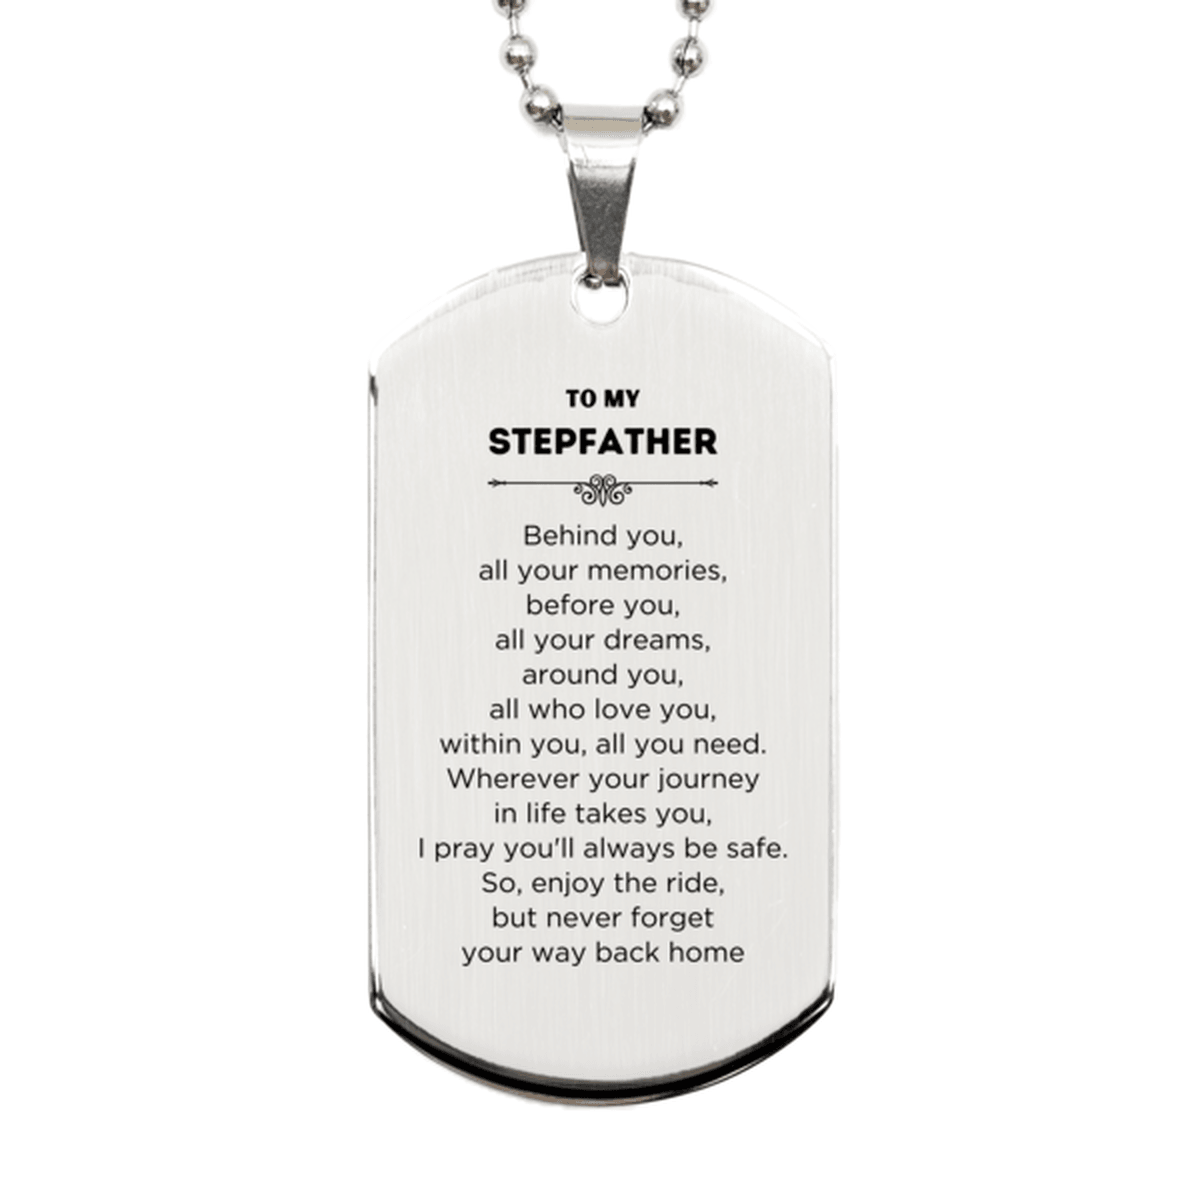 Stepfather Silver Dog Tag Necklace Birthday Christmas Unique Gifts Behind you, all your memories, before you, all your dreams - Mallard Moon Gift Shop